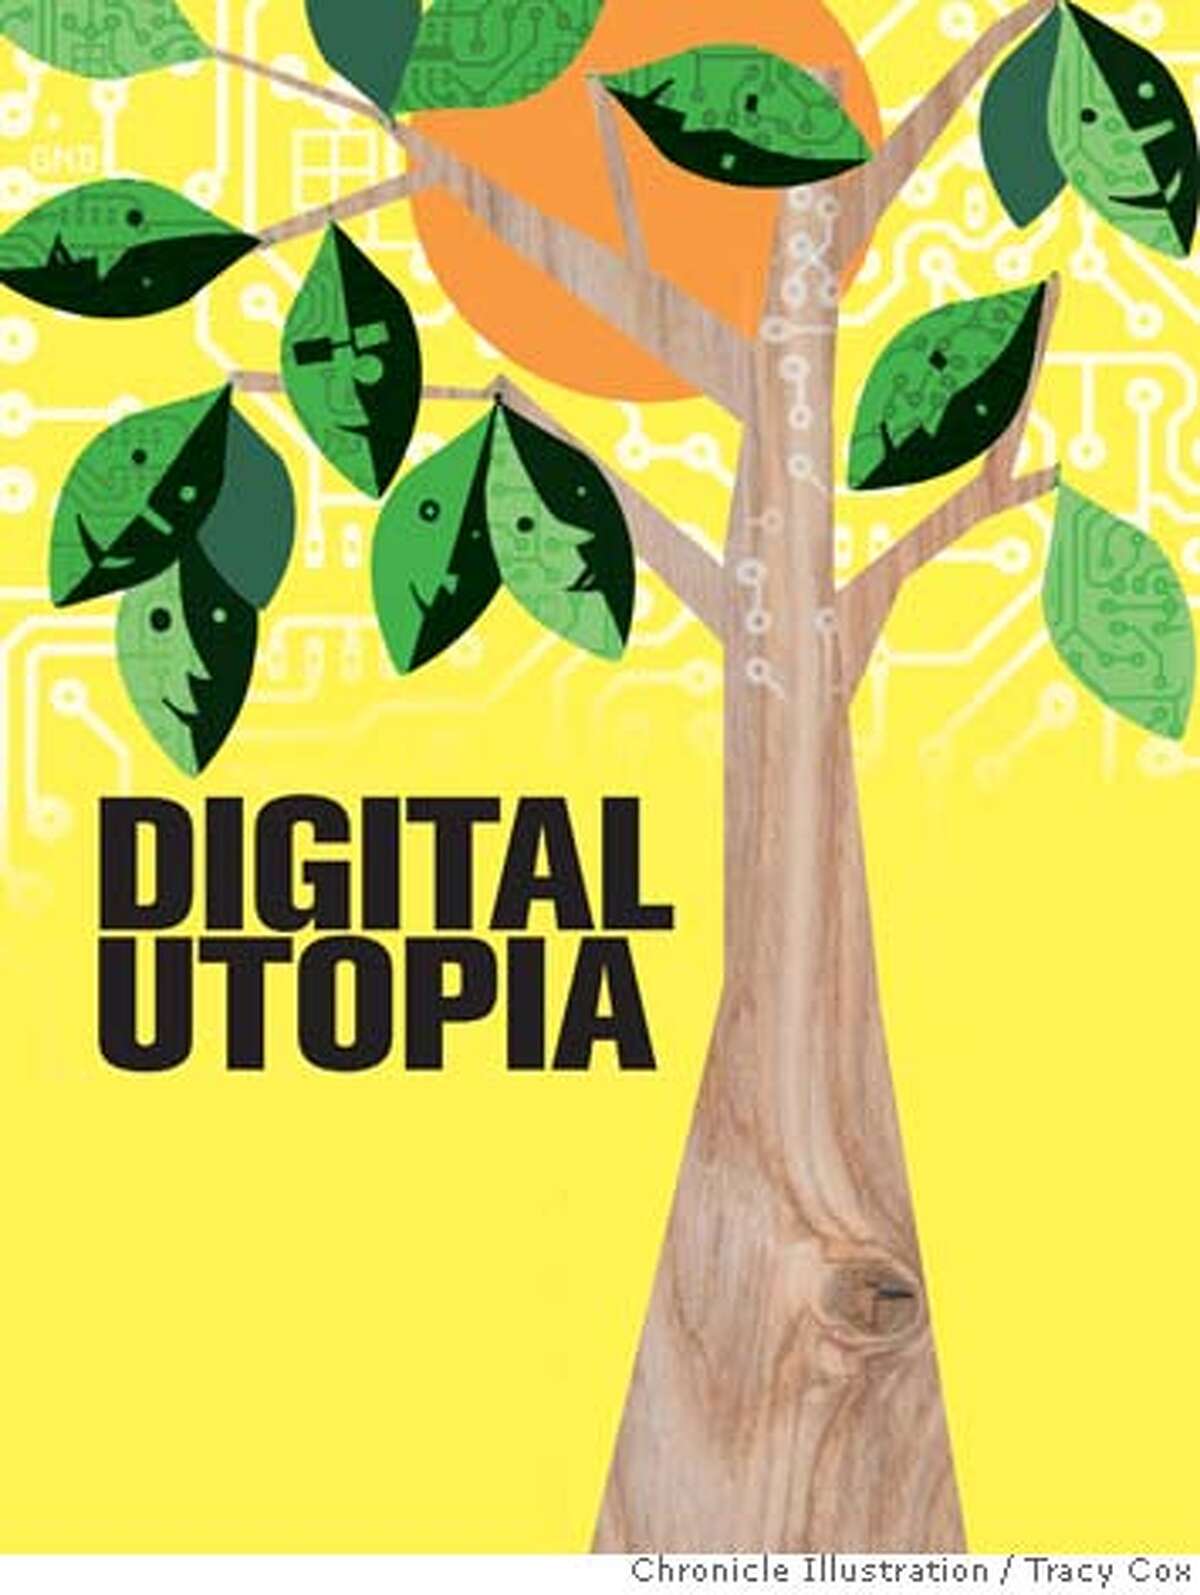 Digital Utopia. Chronicle illustration by Tracy Cox